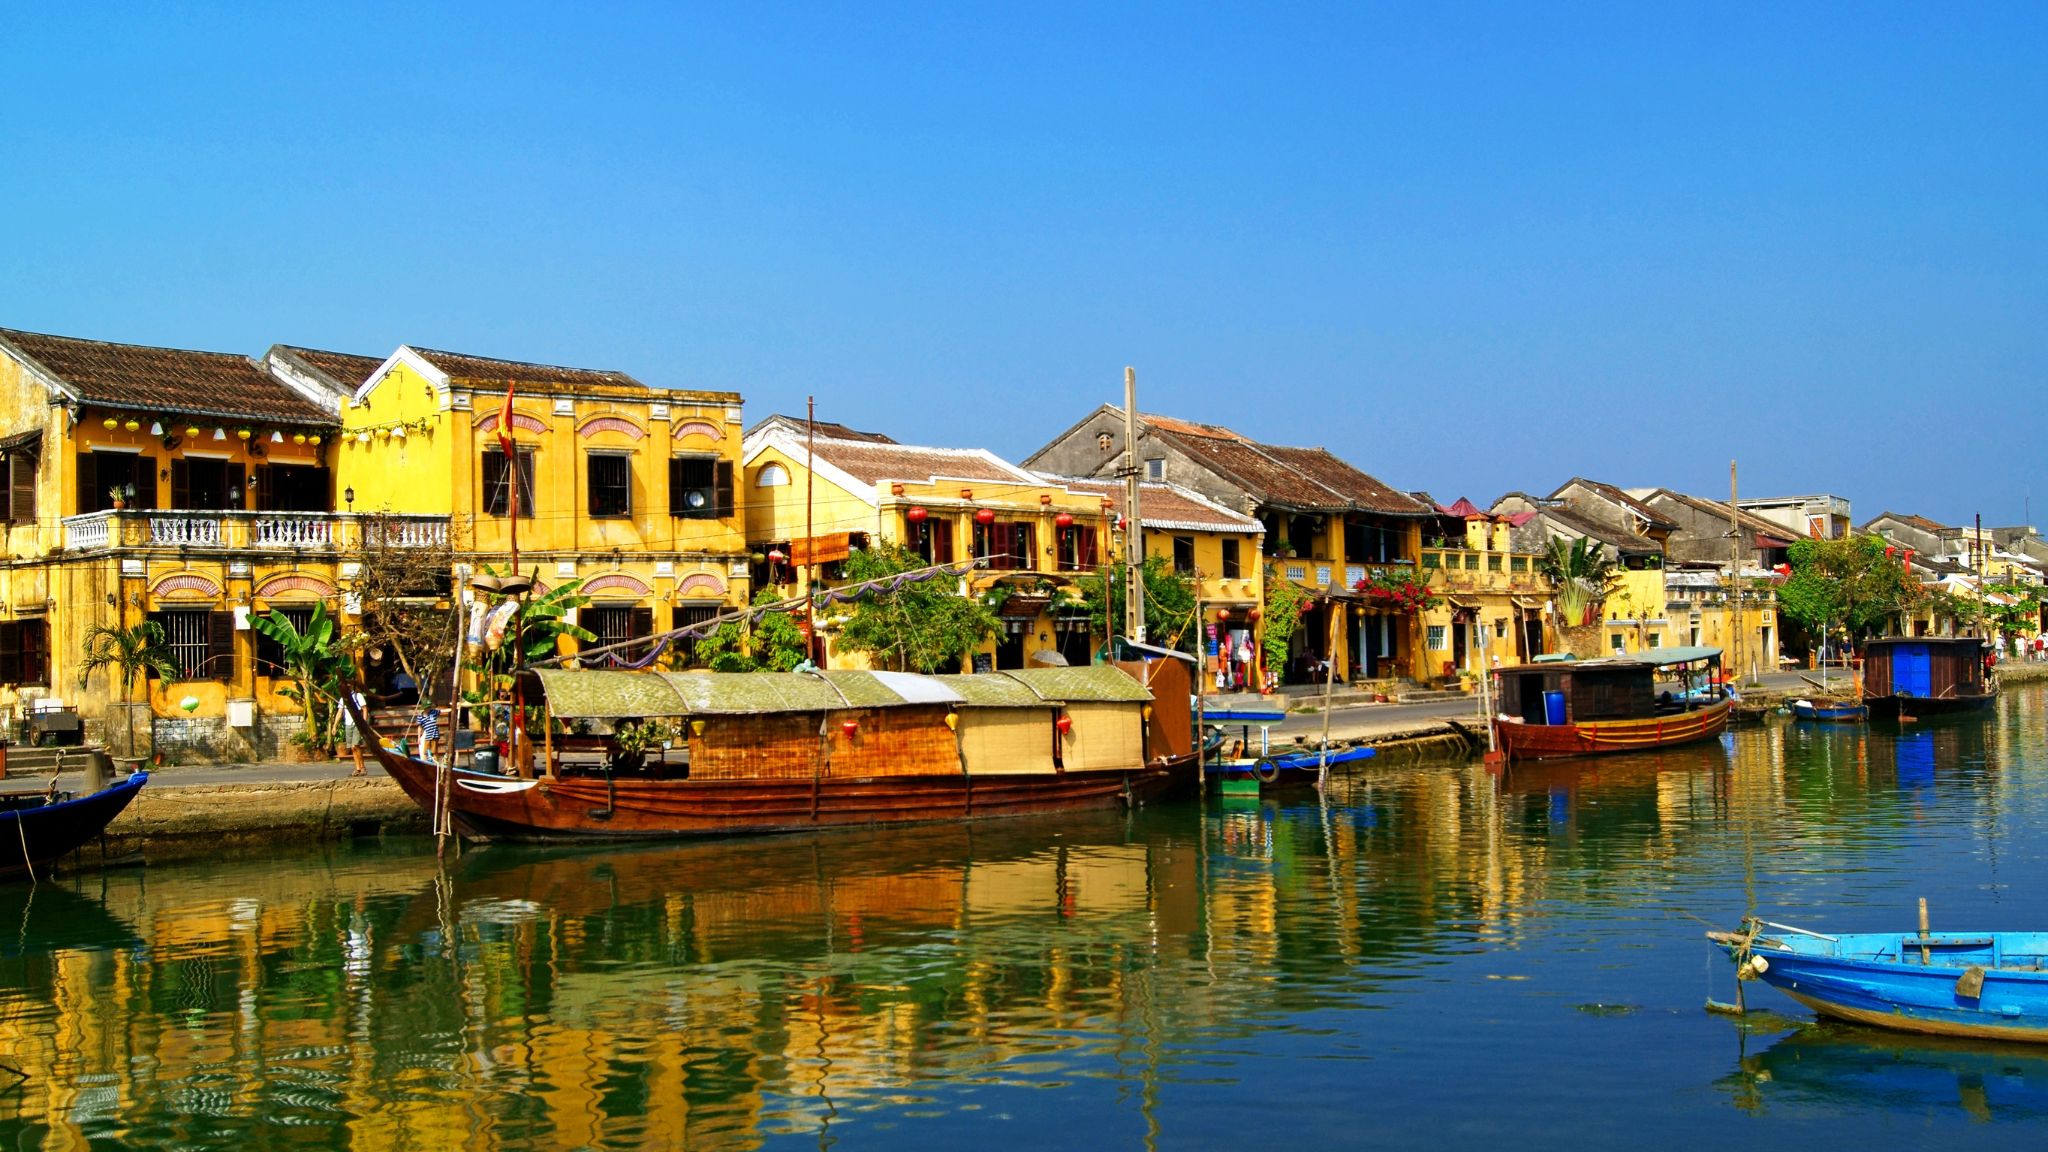 Day 9 Immerse In The Tranquil Atmosphere Of Hoi An